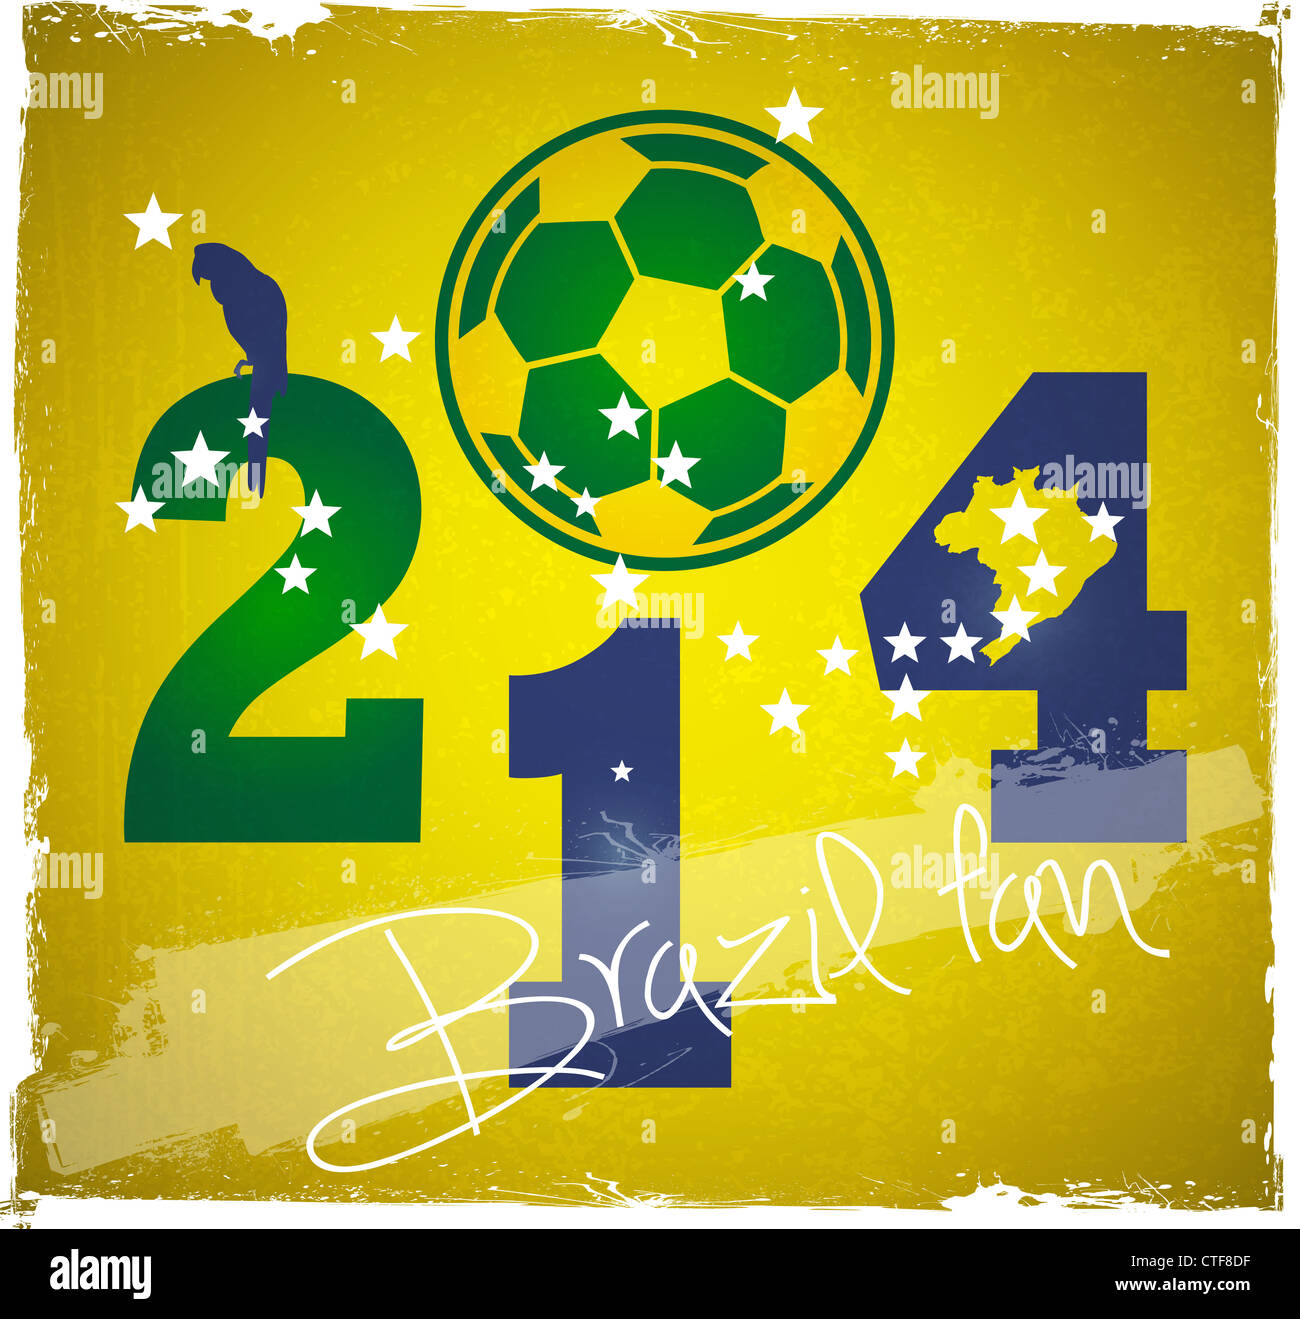 2014 Brazil fan football world cup poster on grunge background Stock Photo